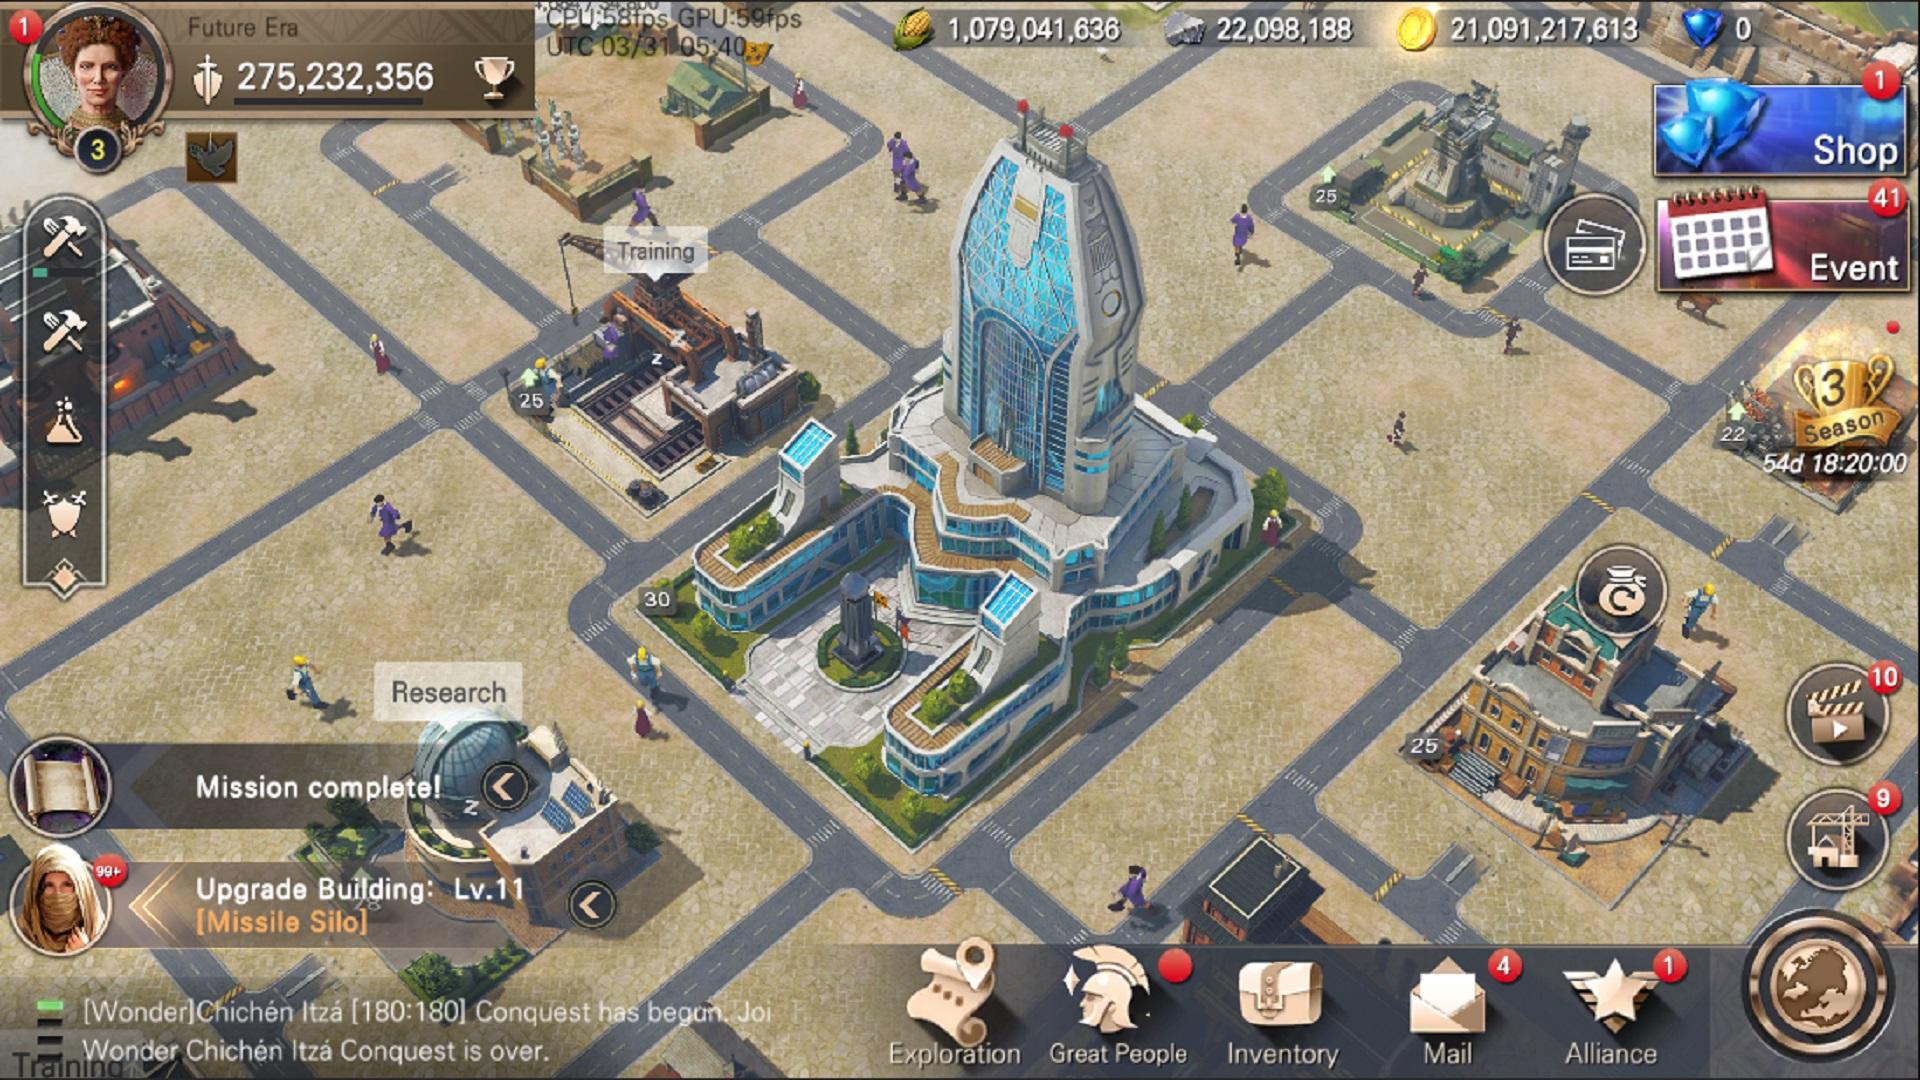 Rise of Nations developer announces DomiNation for iOS and Android